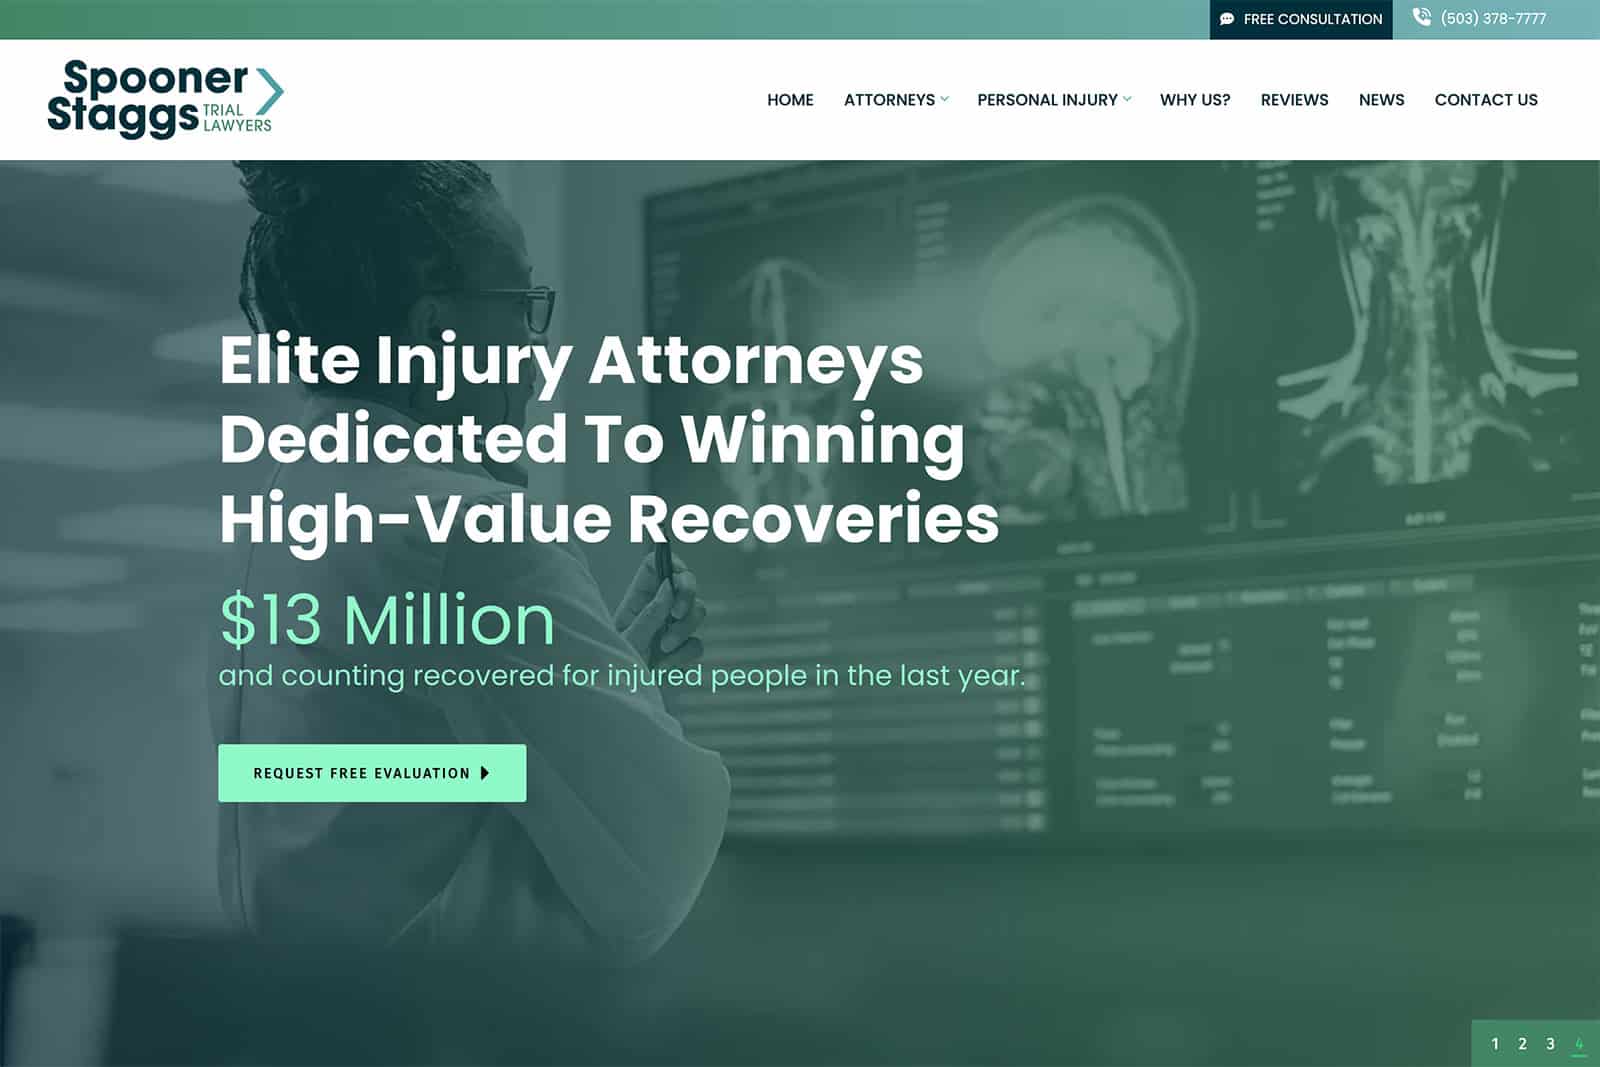 Screenshot of Spooner Staggs Website - Example of Personal Injury Law Firm Website Design - Home Page